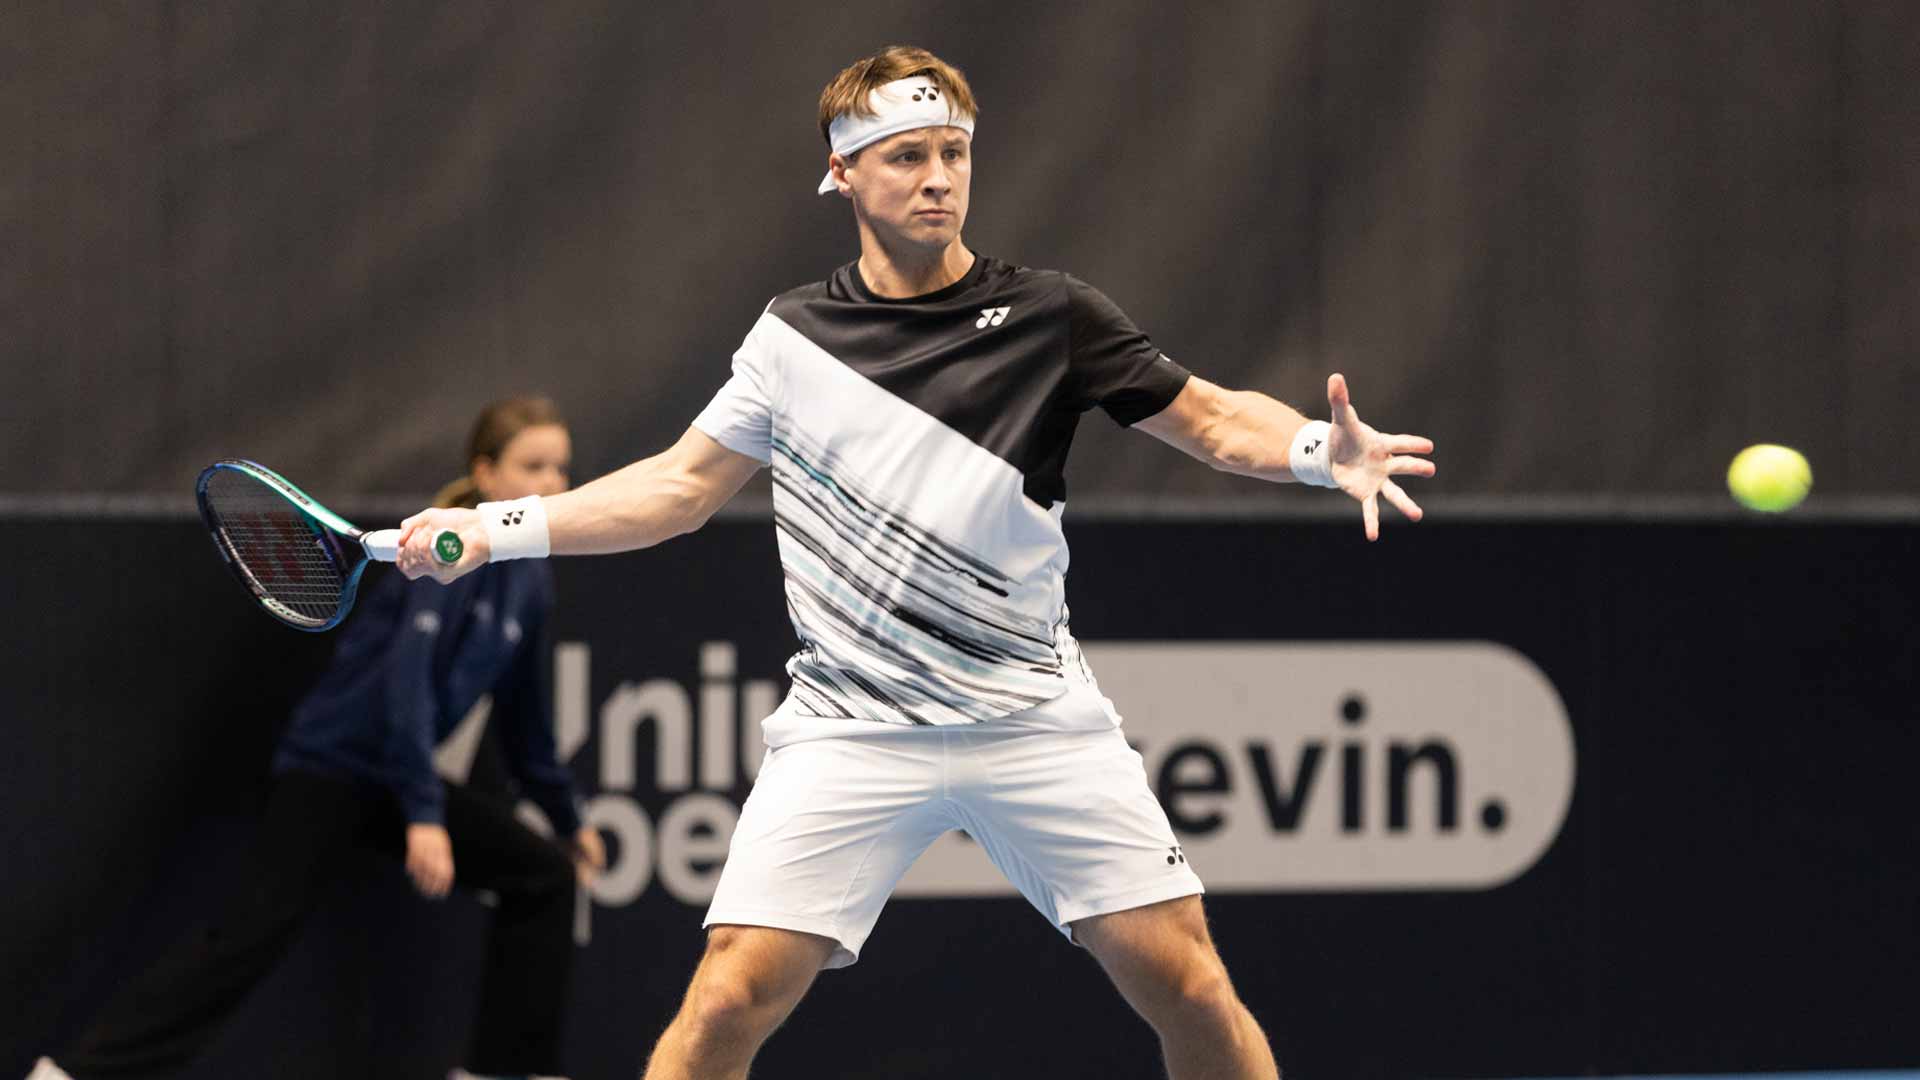 Home favourite Ricardas Berankis in action at the 2022 Vilnius Challenger.